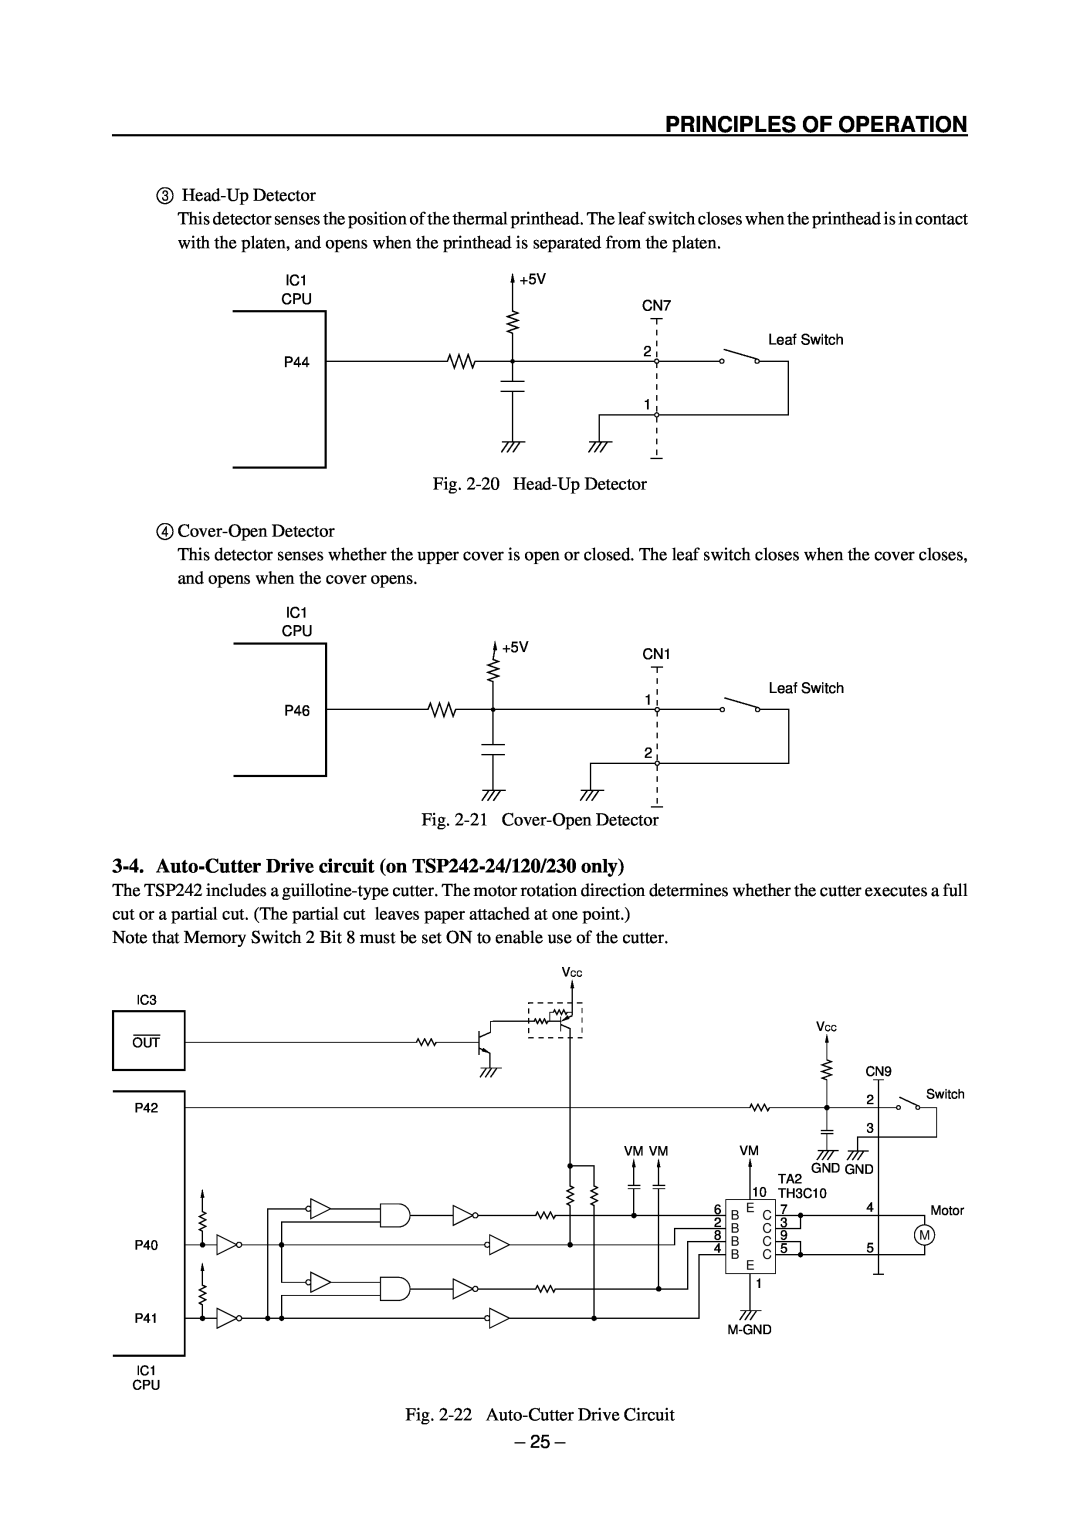 Star Micronics TSP200 technical manual Auto-Cutter Drive circuit on TSP242-24/120/230 only, Principles Of Operation 